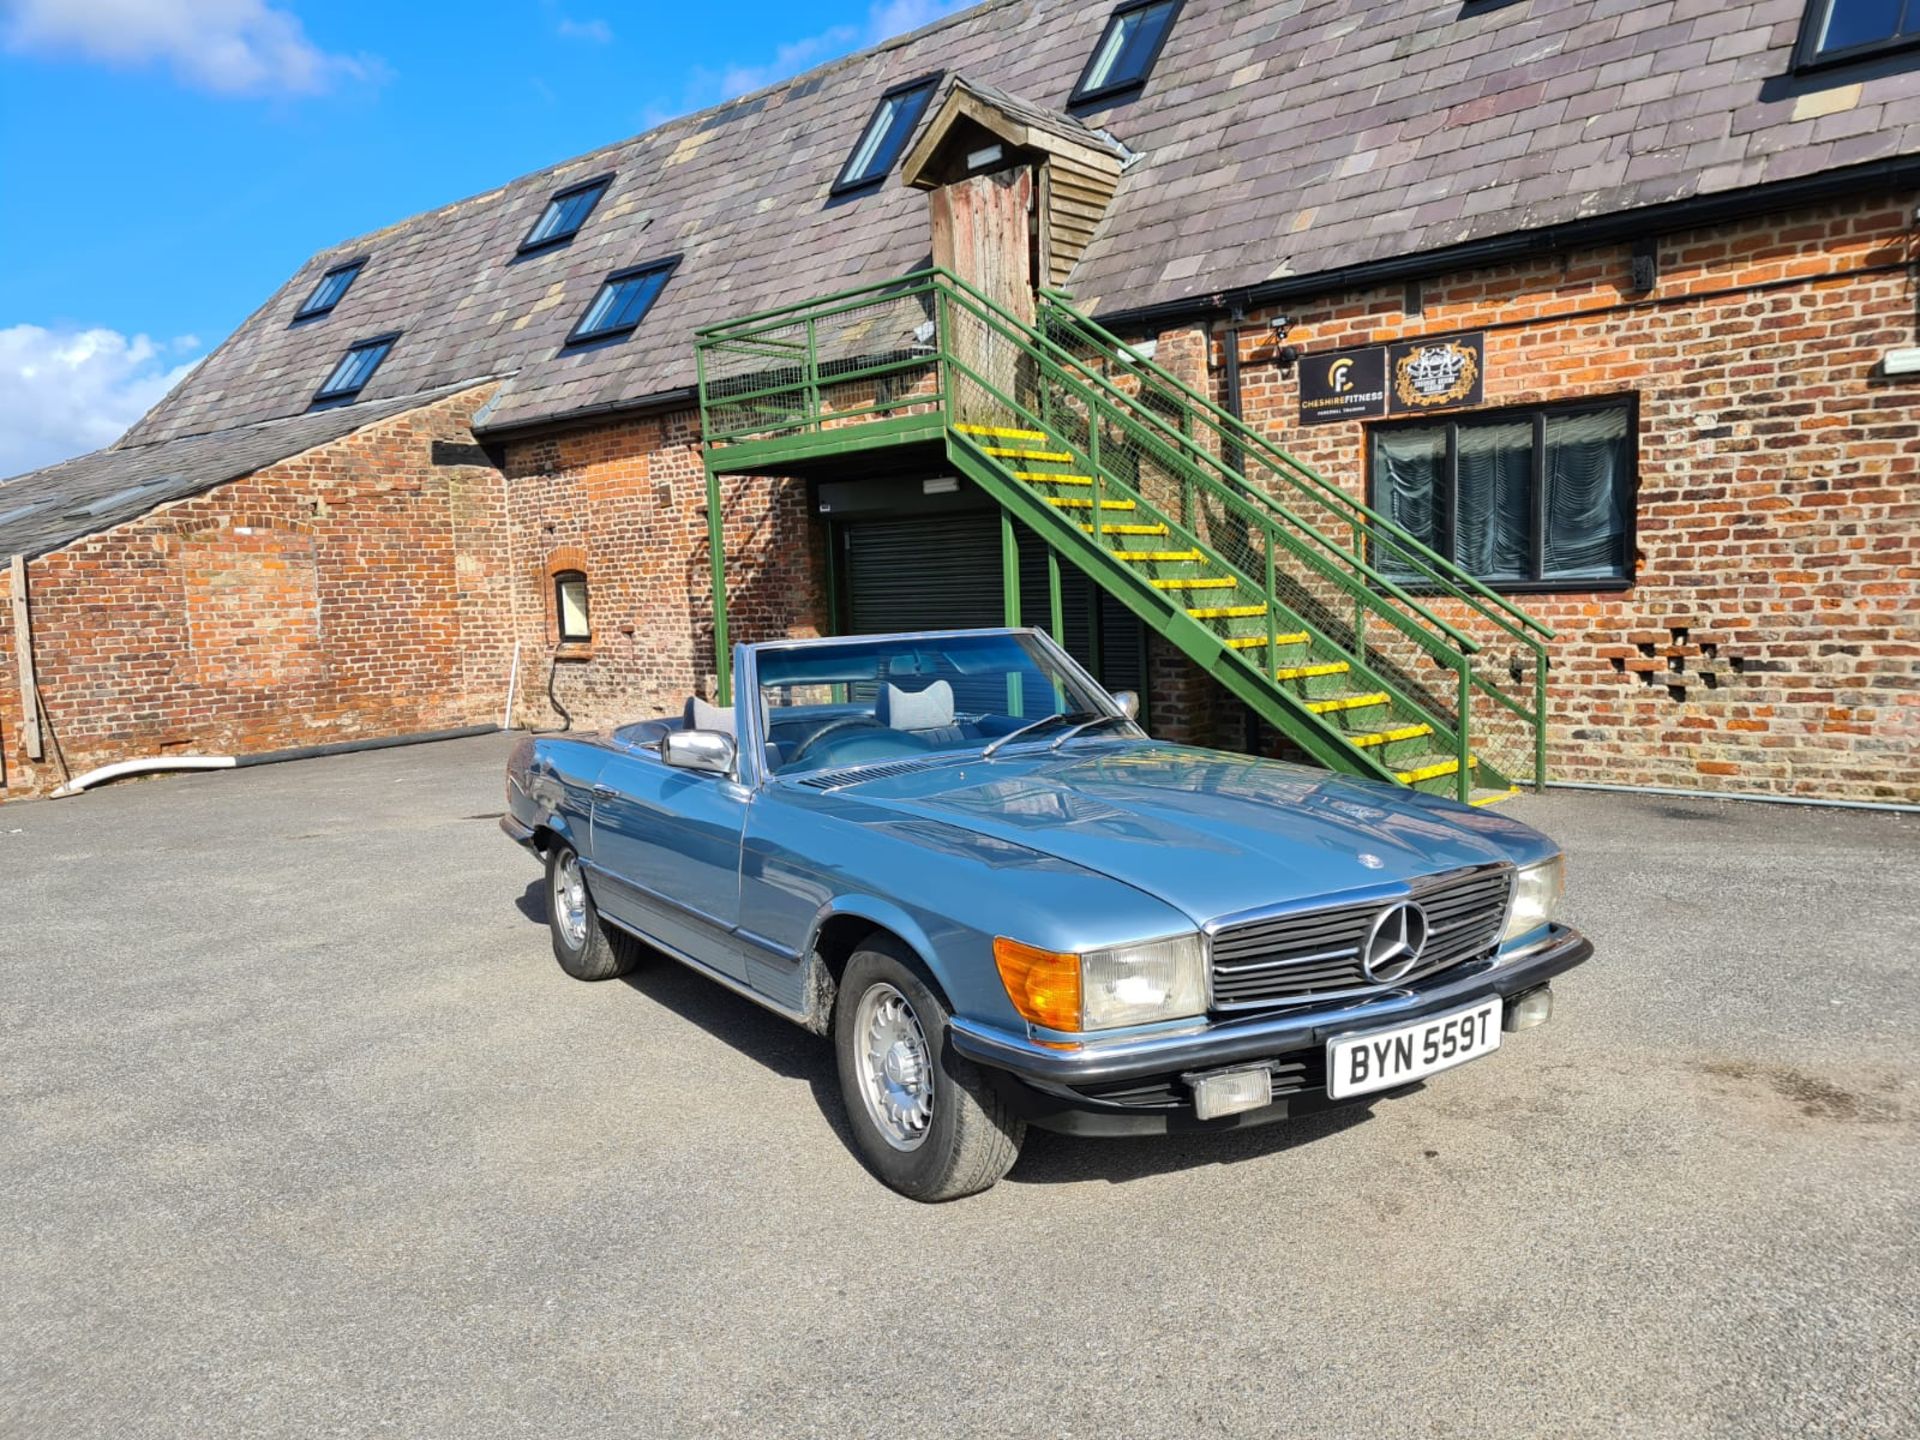 Stunning 1979 Mercedes Benz SL350 V8 With Factory Hardtop - Restored in 2018 - Image 17 of 22